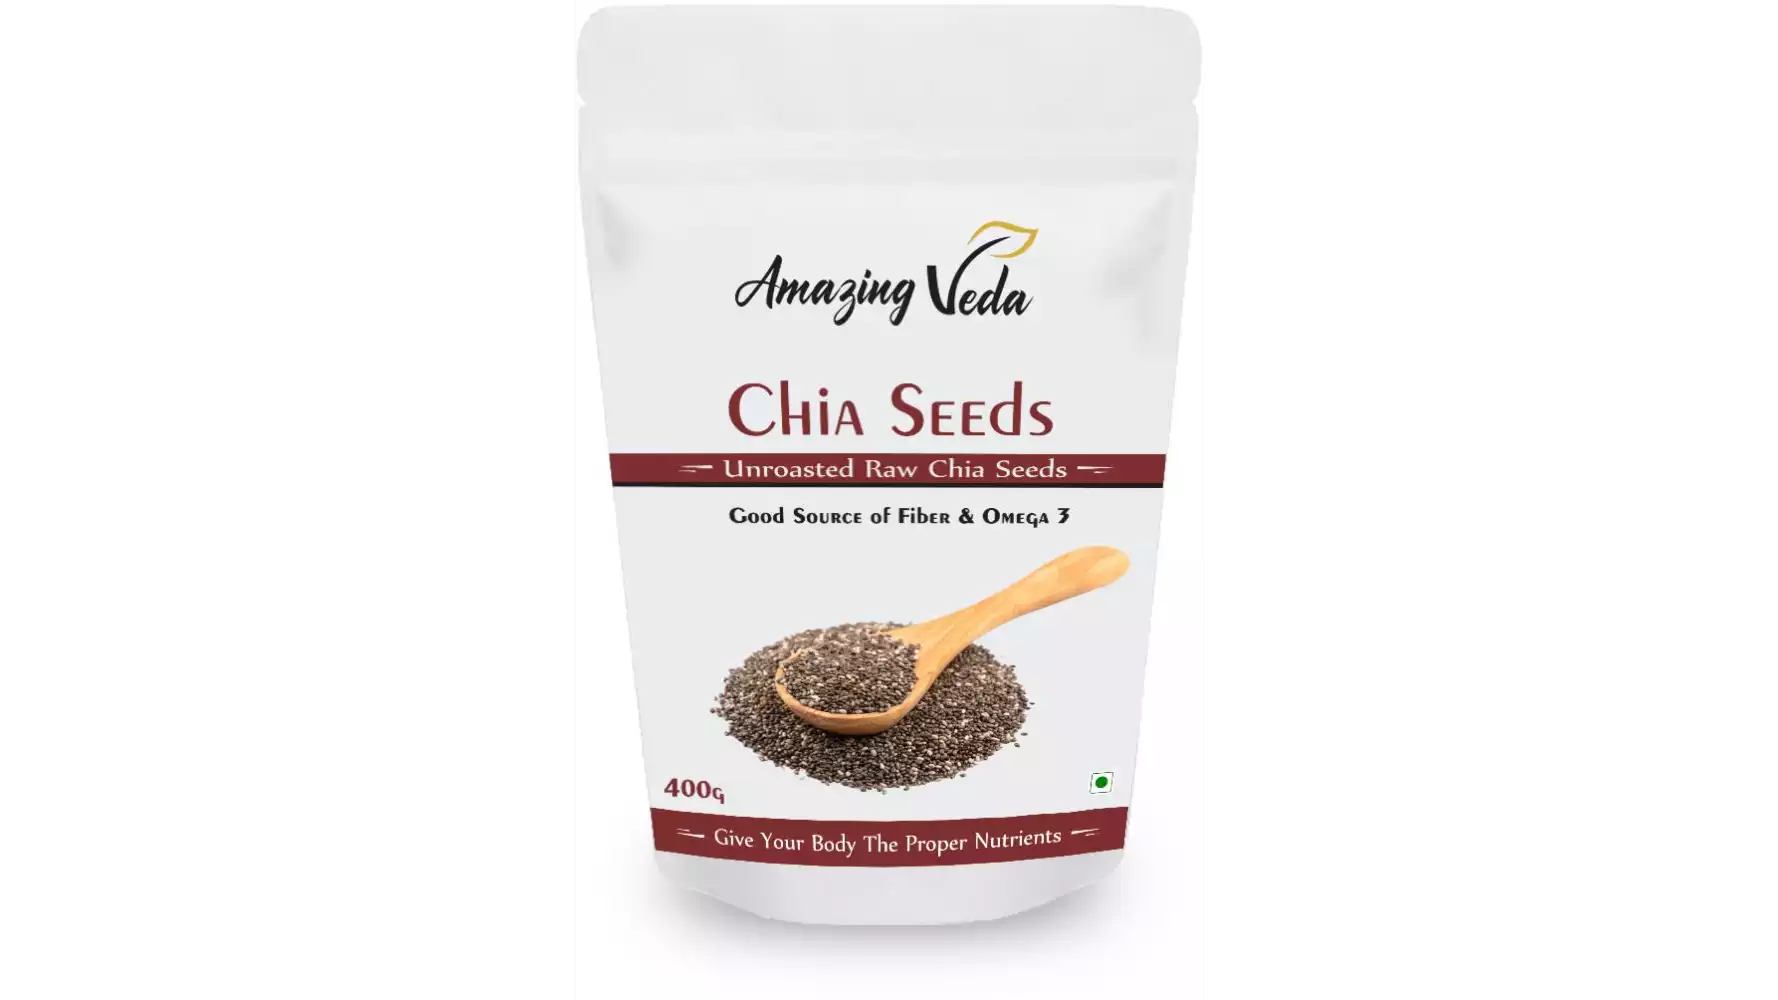 Amazing Veda Unroasted Chia Seeds (400g)